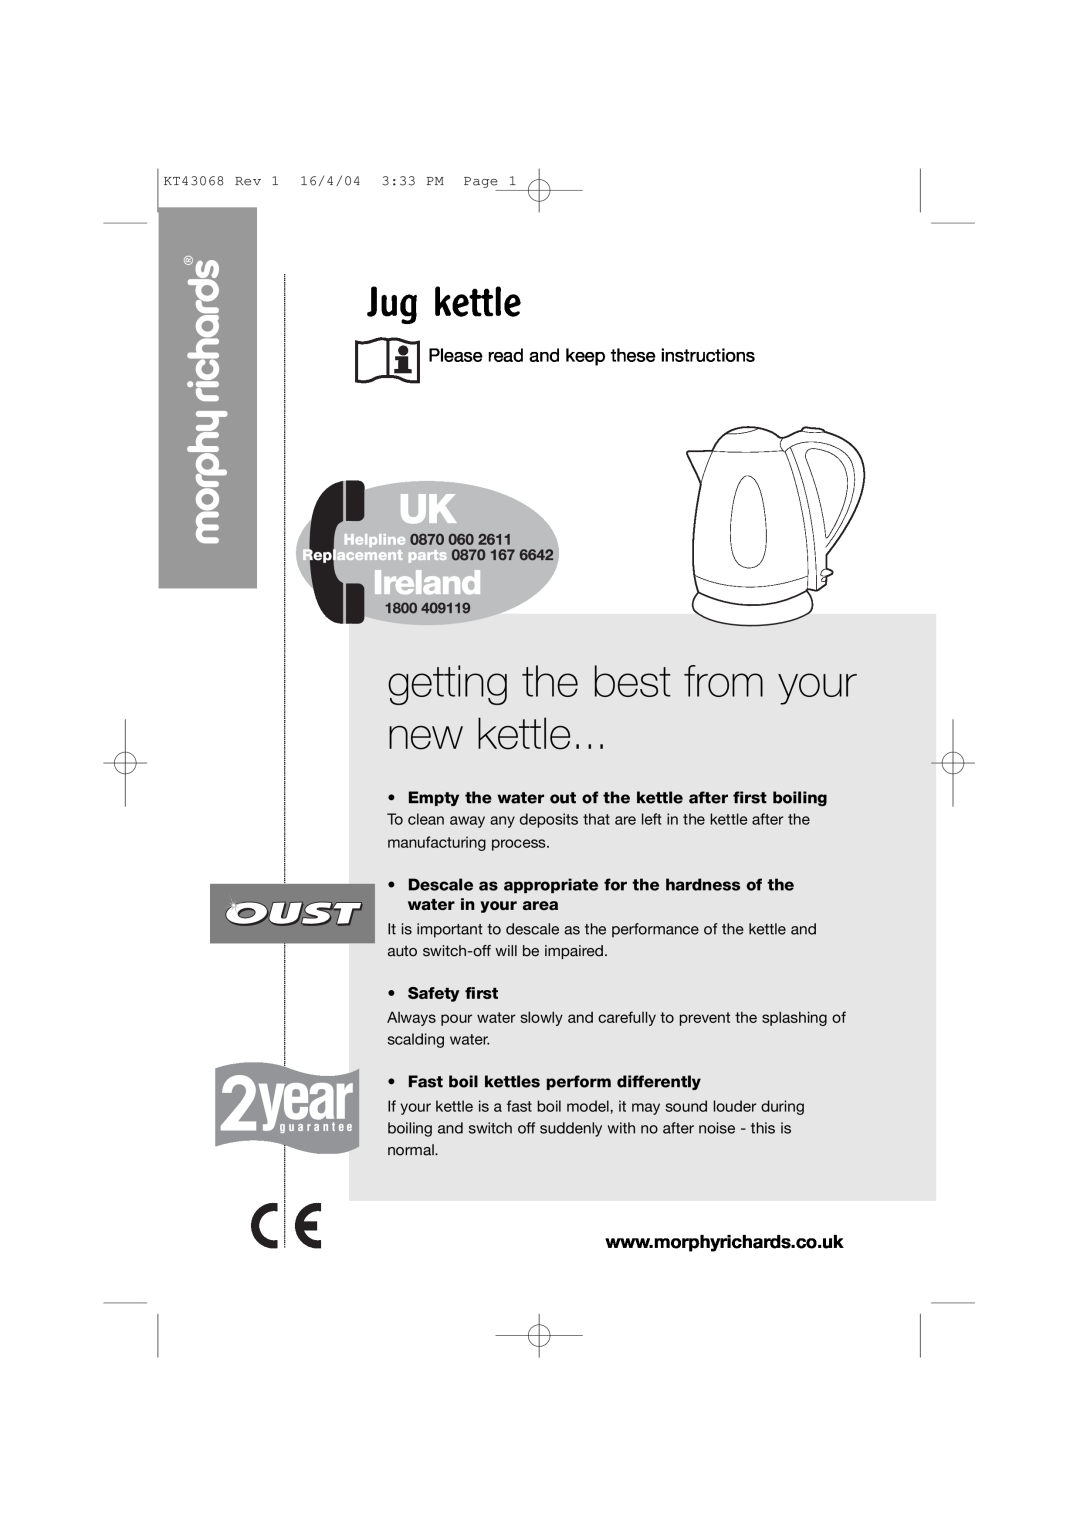 Morphy Richards Jug Kettle manual Jug kettle, getting the best from your new kettle, • Safety first 